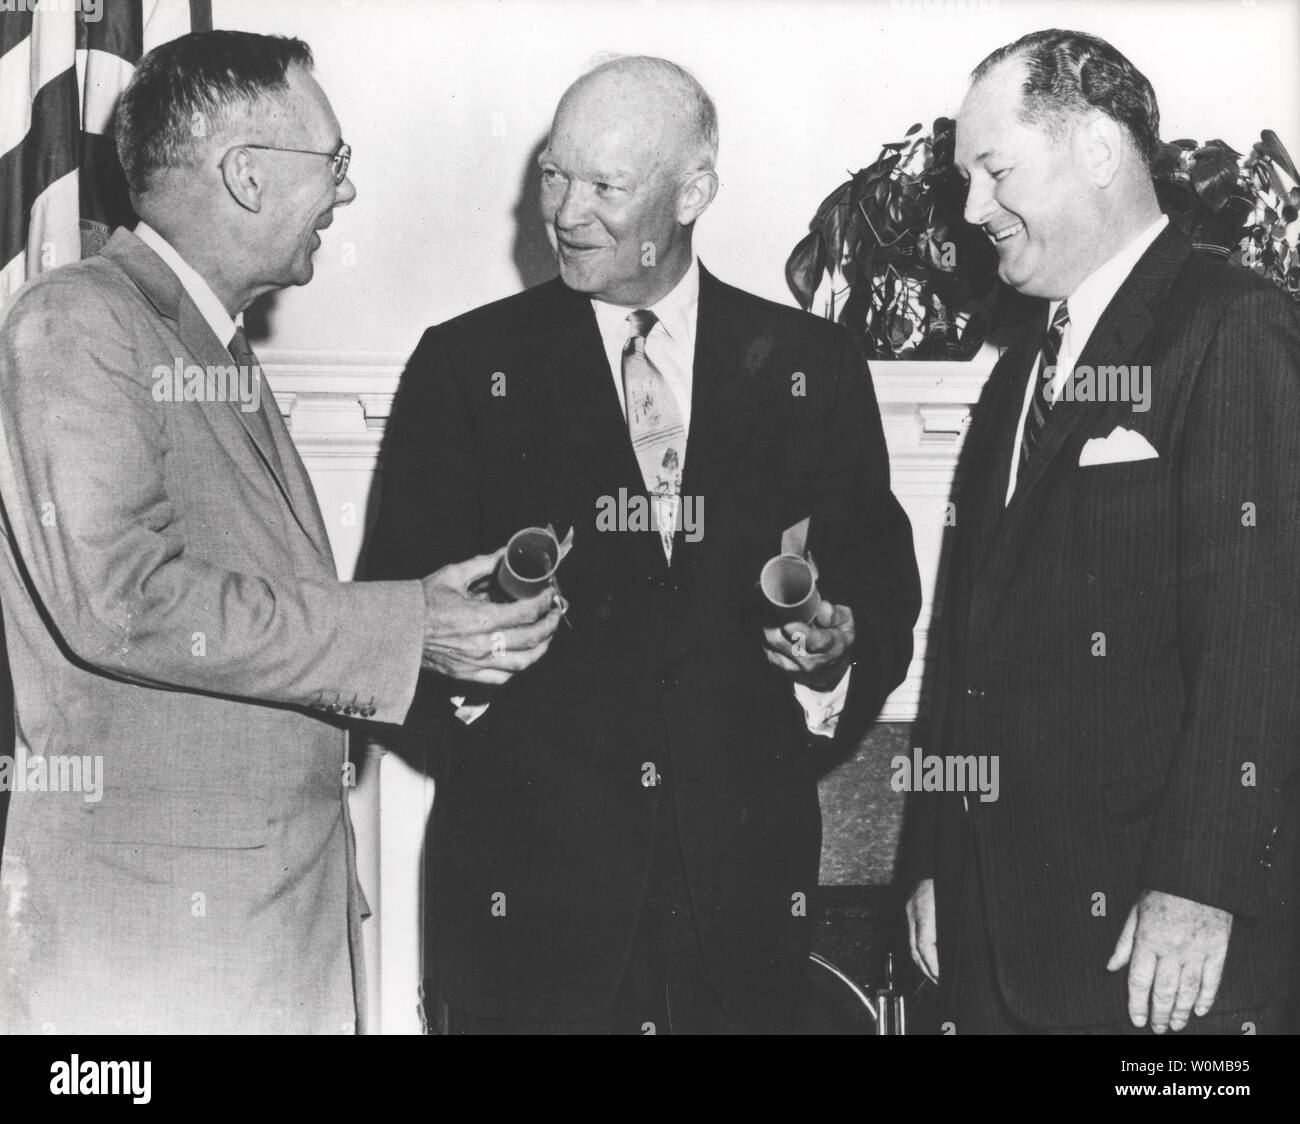 President Dwight D. Eisenhower (C) commissions Dr. T. Keith Glennan (R) as NASA Administrator and Dr. Hugh L. Dryden as NASA Deputy Administrator in Washington on July 29, 1958.  NASA celebrates the 50th anniversary of the Space Age marked by the October 4, 1957 launch of Sputnik, the world's first artificial satellite, made by the Soviet Union. (UPI Photo/NASA/FILES) Stock Photo